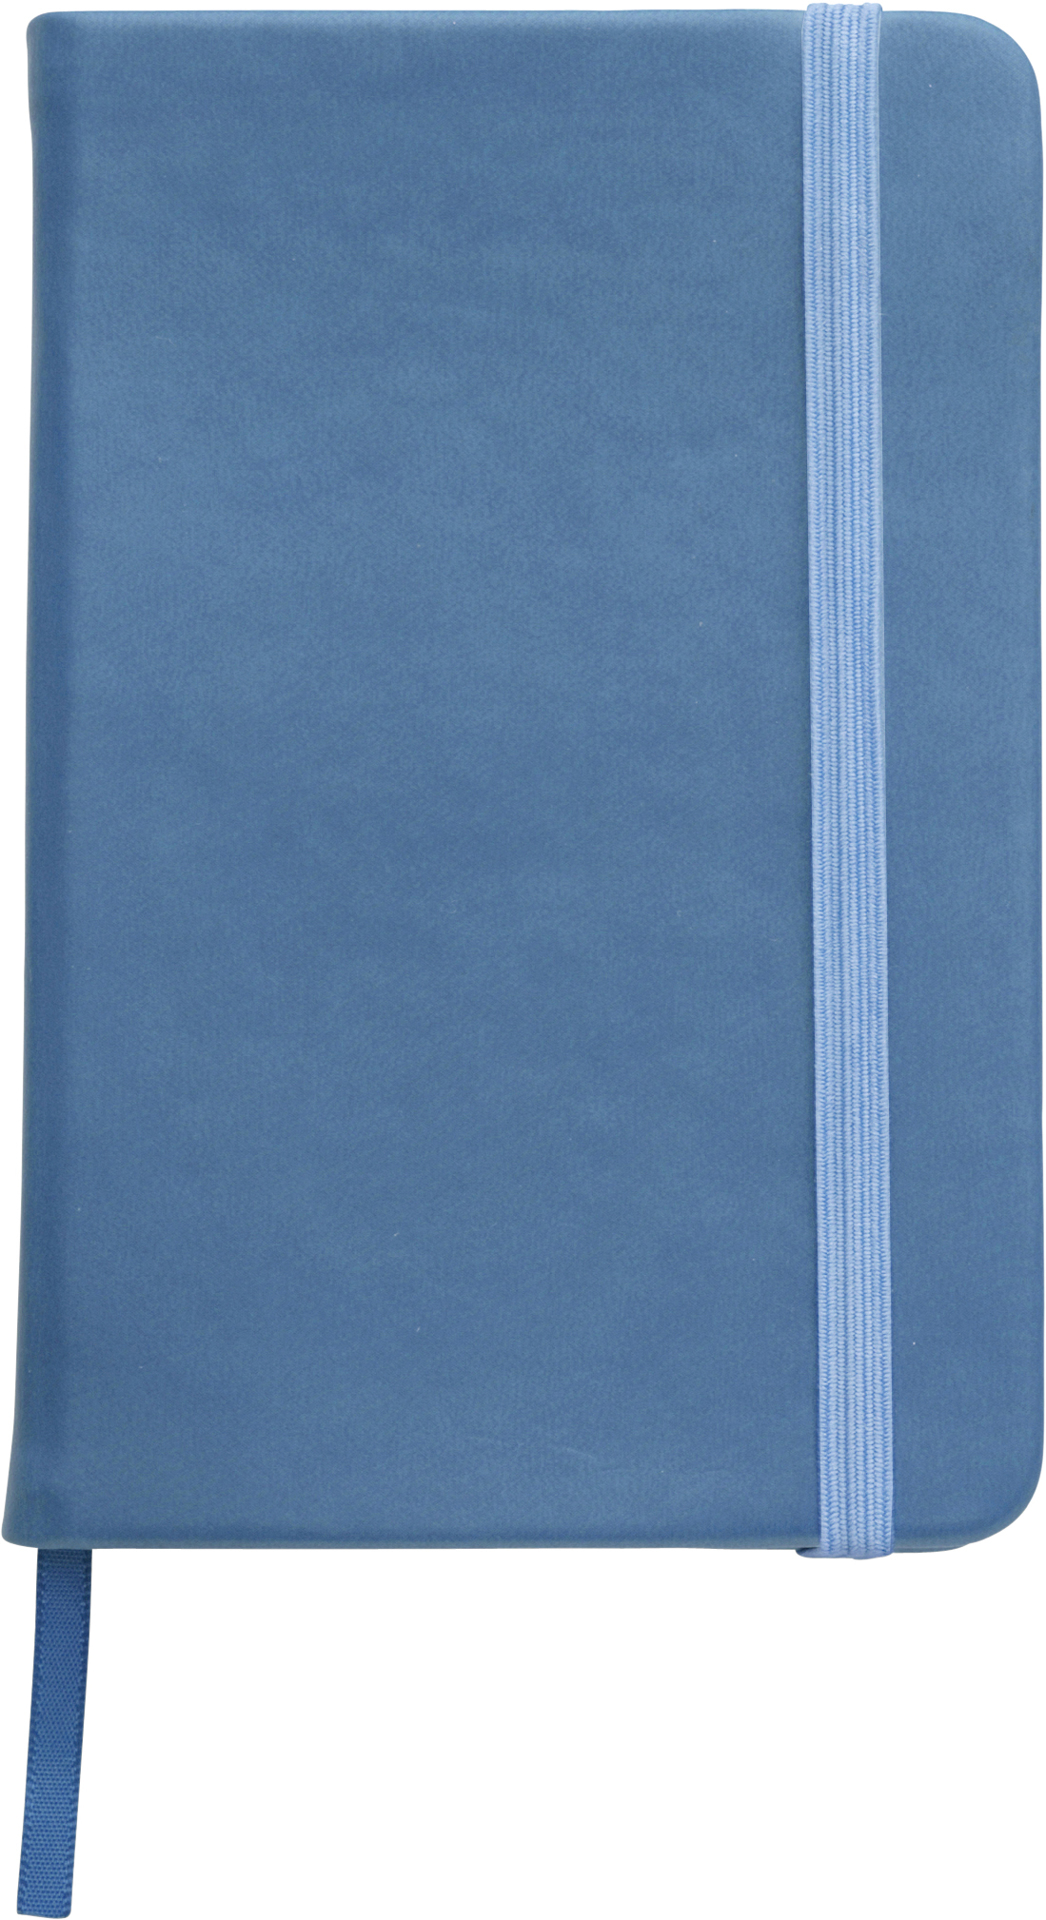 A6 Notebook with soft PU cover in light blue